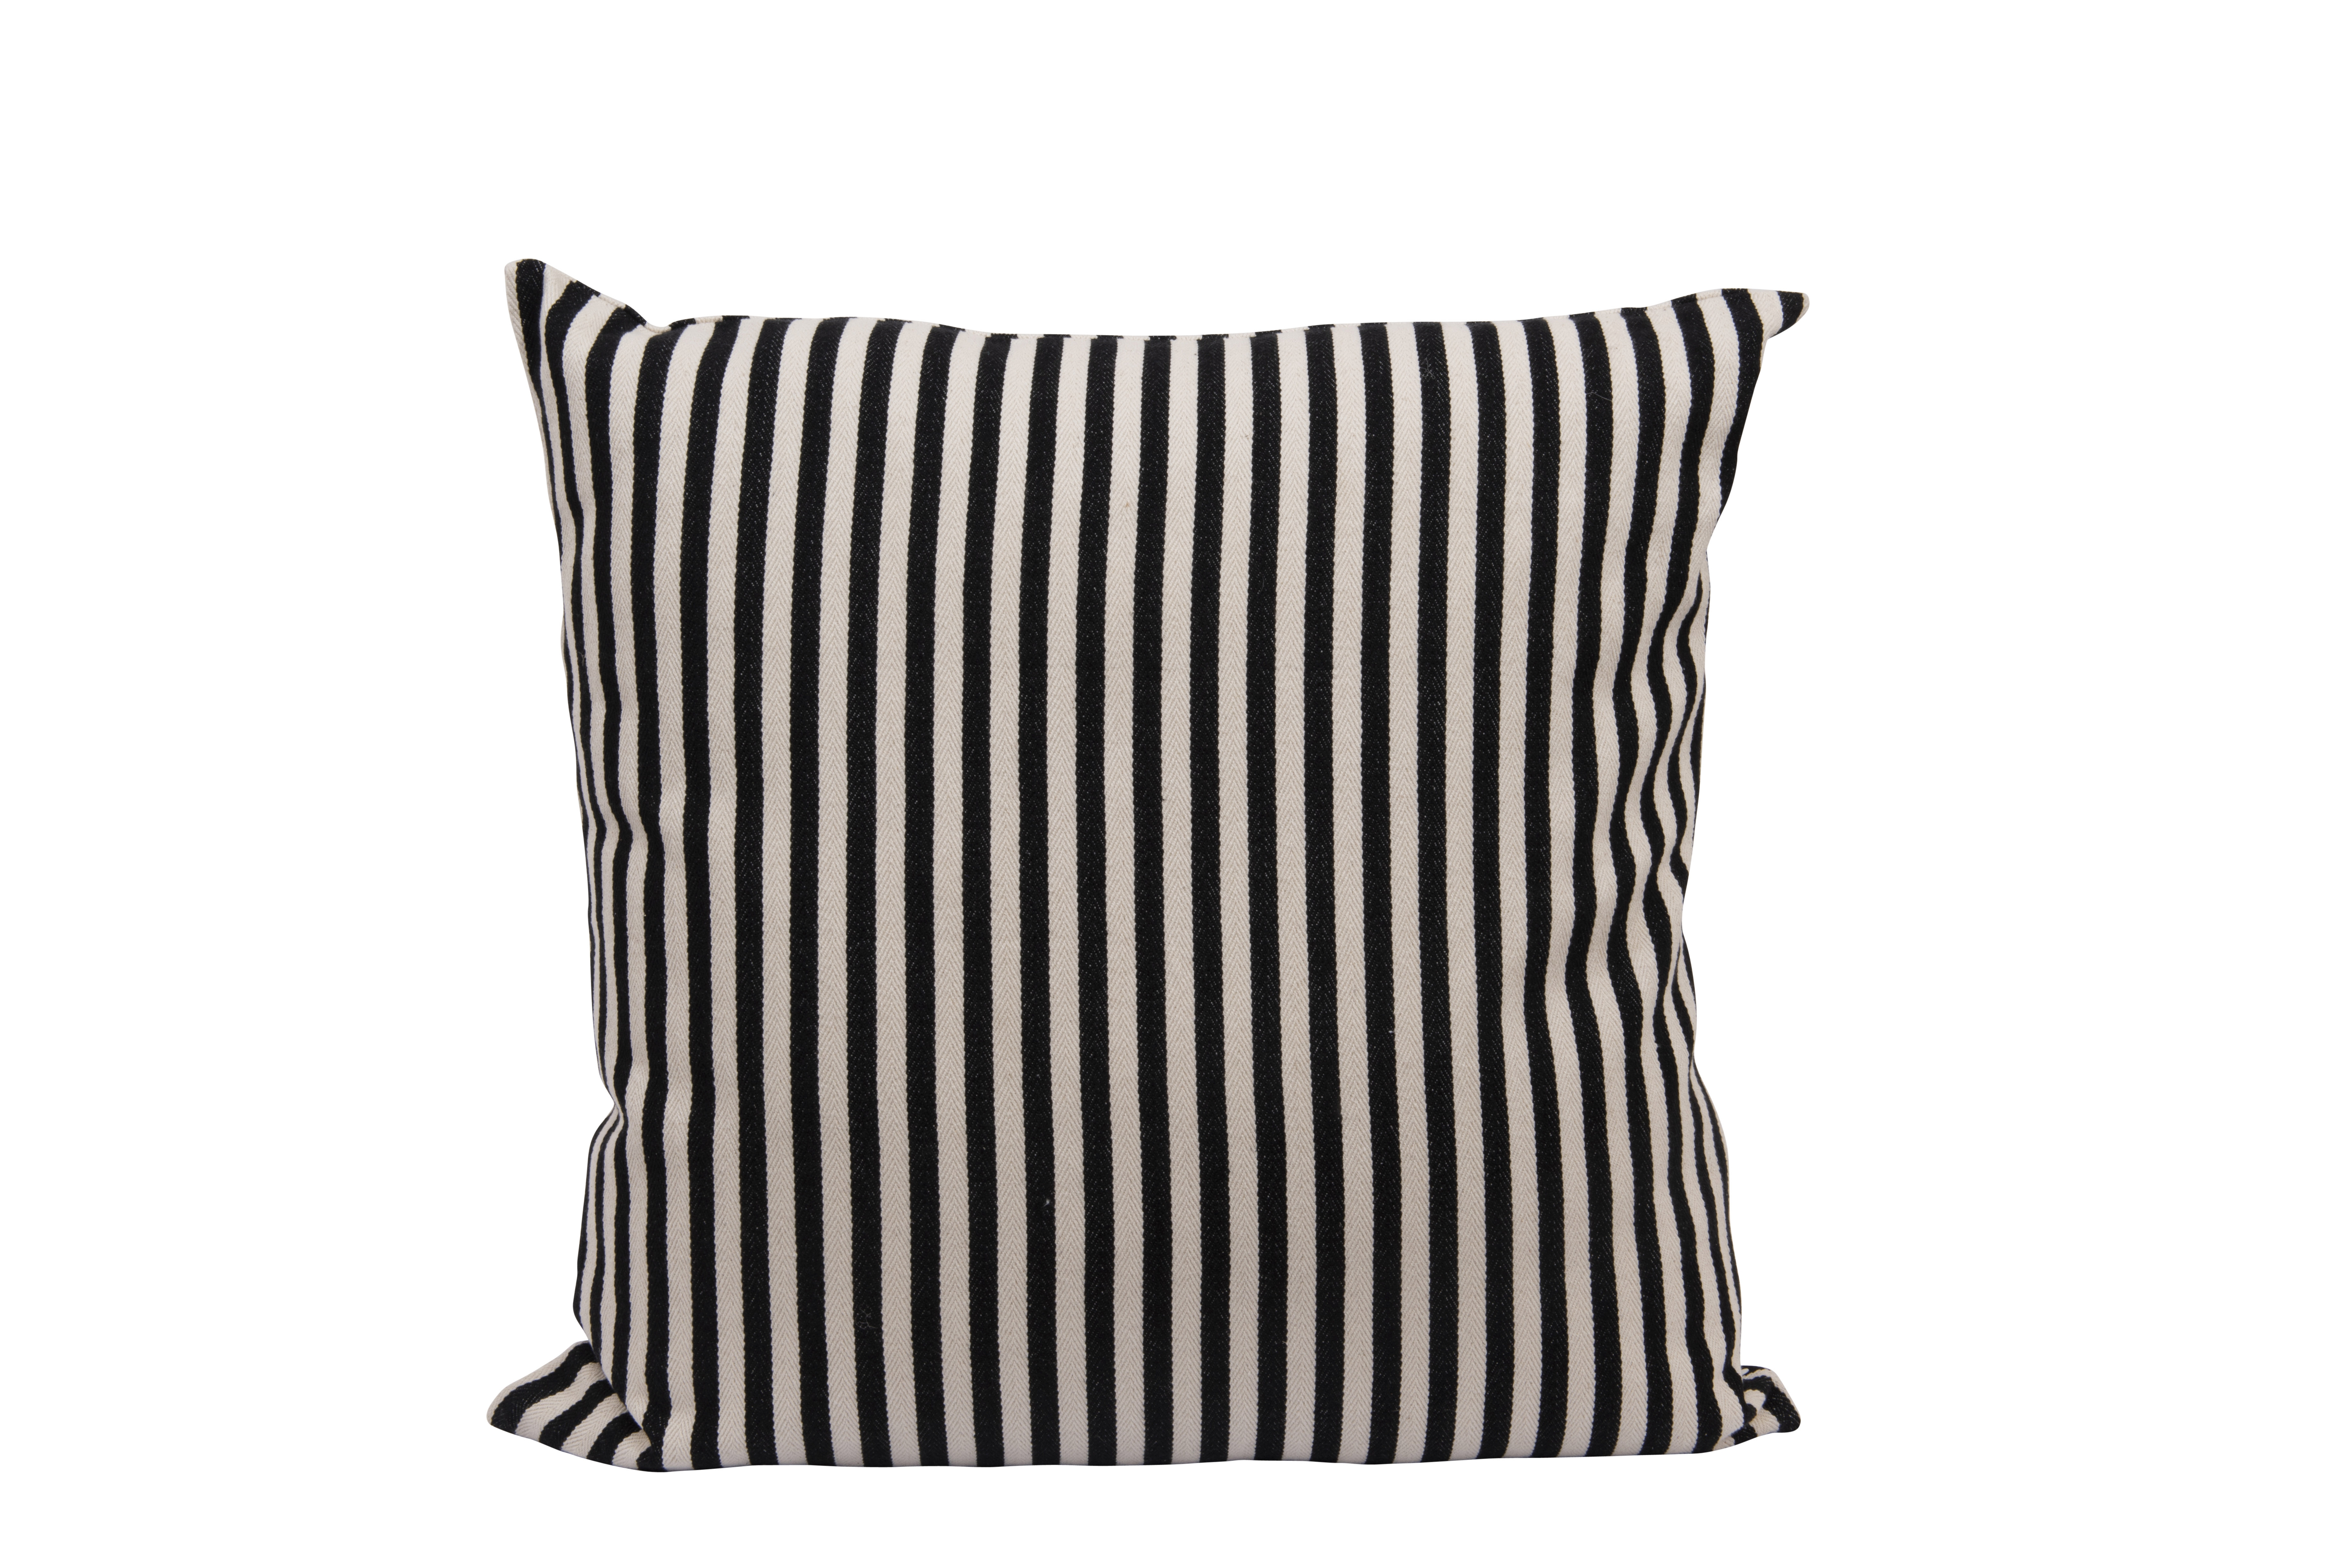 Square Cotton Woven Pillow with Black & Cream Stripes - Nomad Home